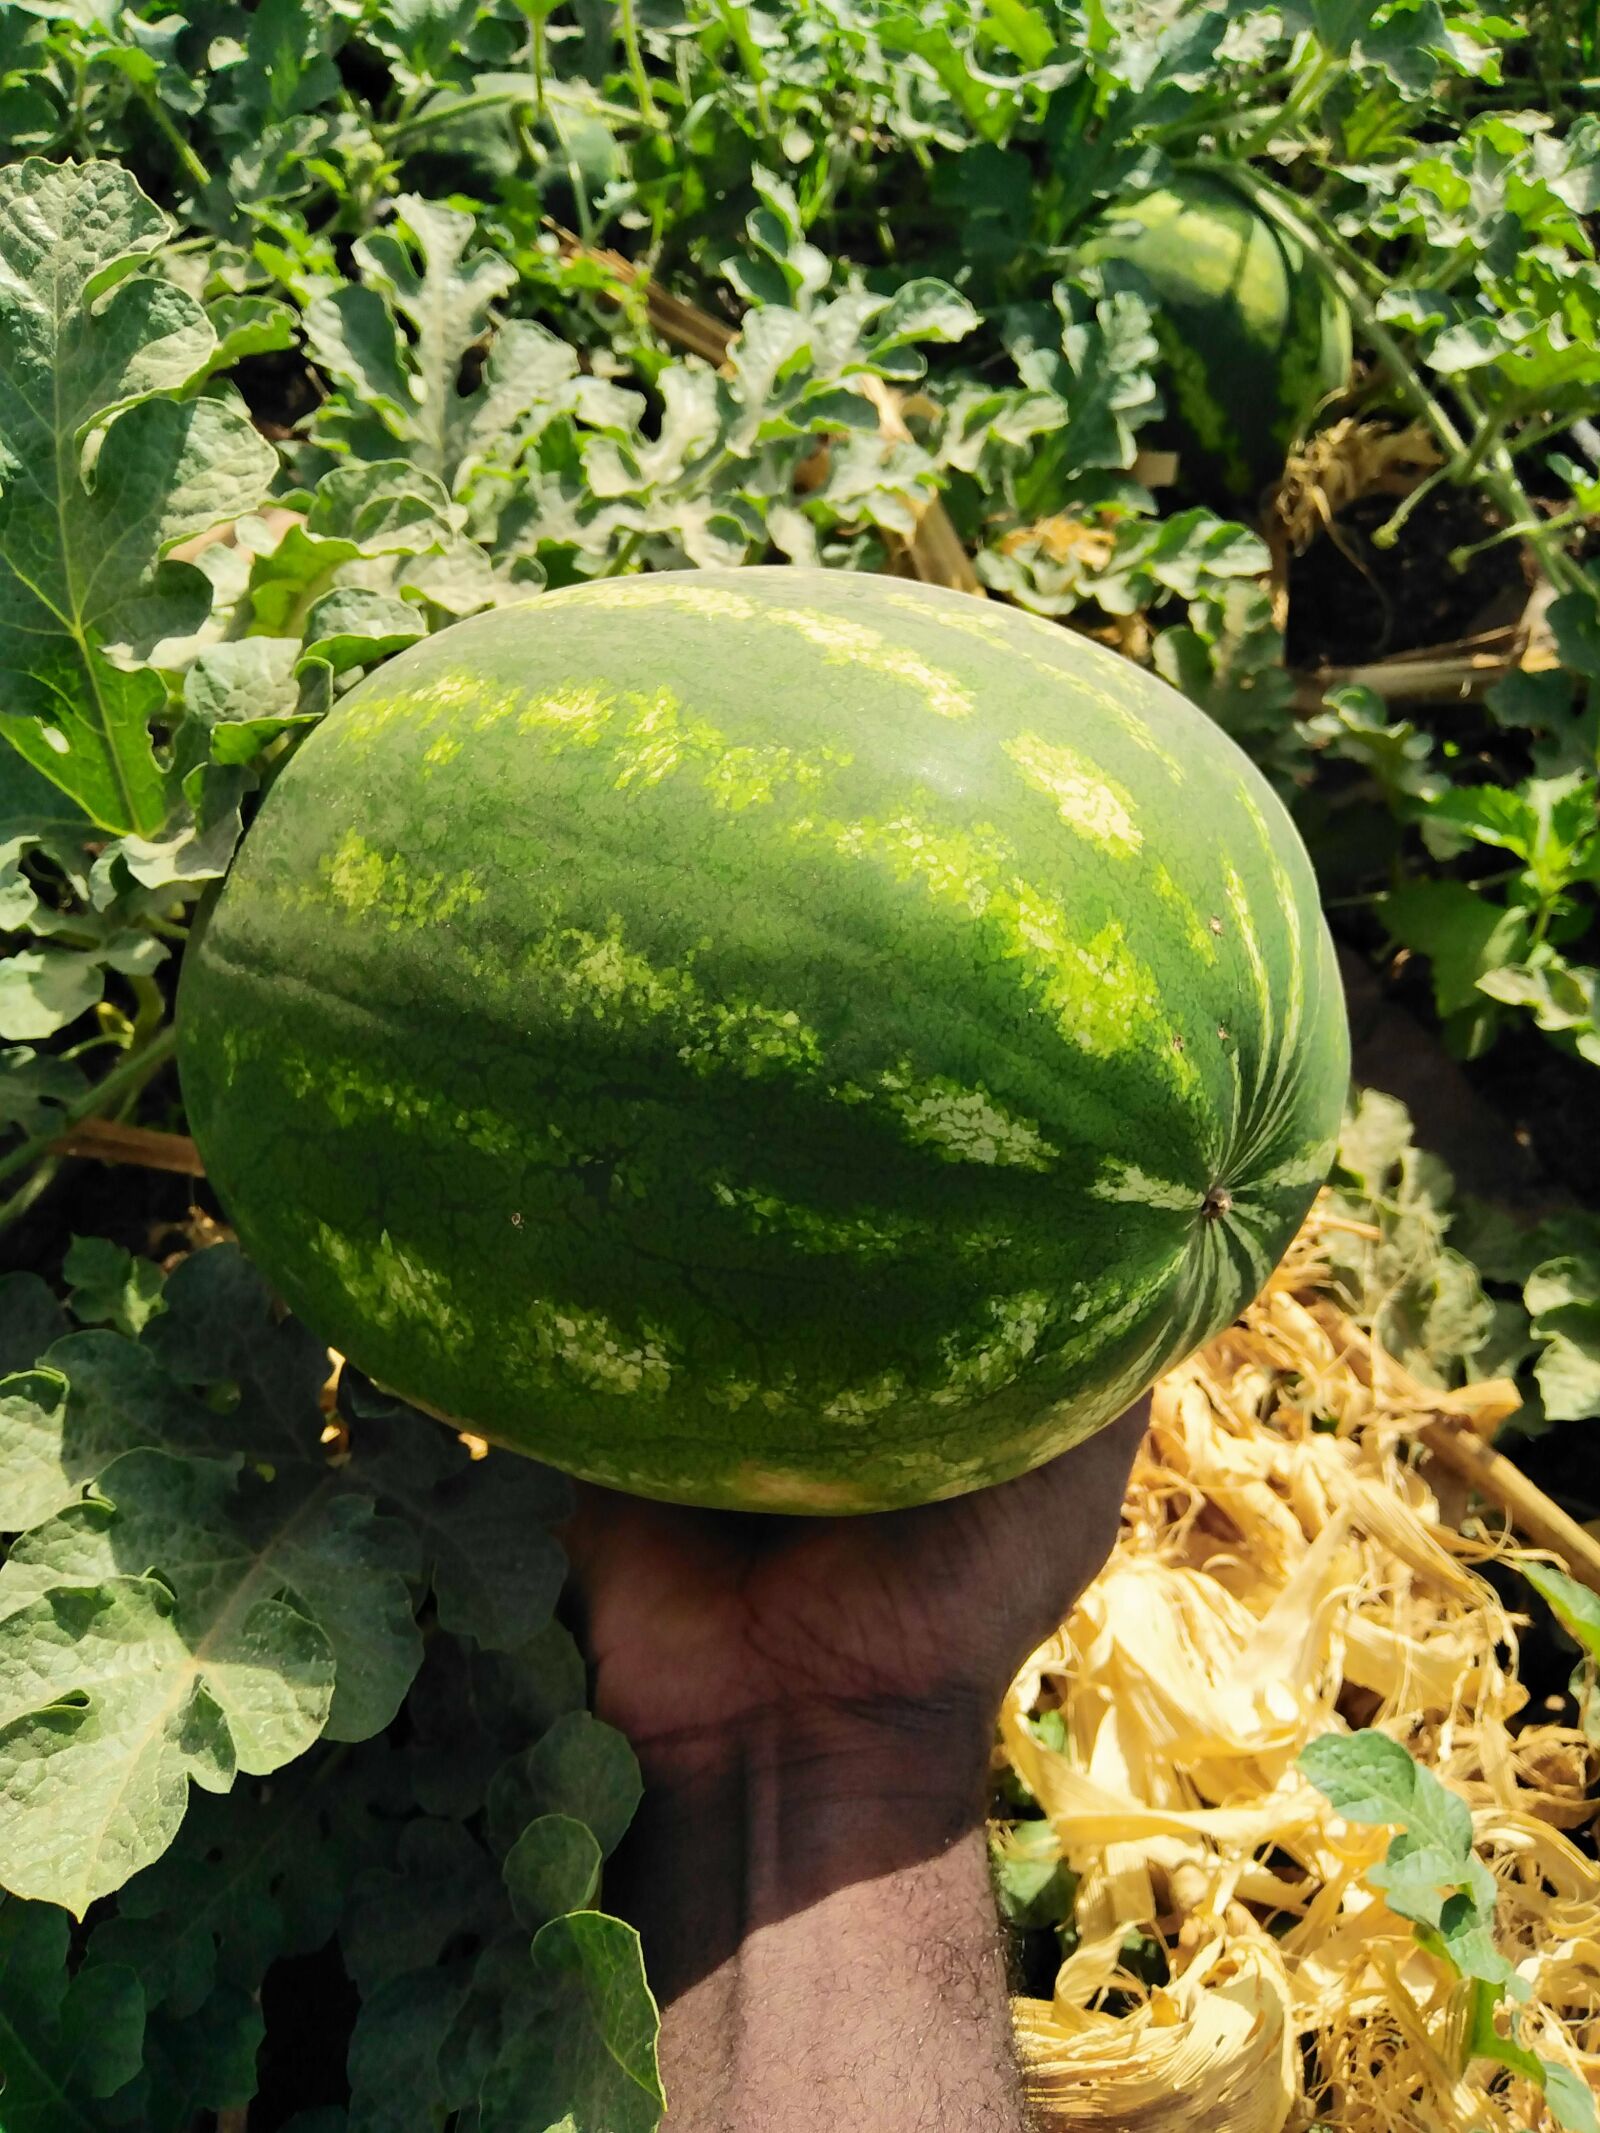 HUAWEI DUB-LX1 sample photo. Water melon, striped water photography